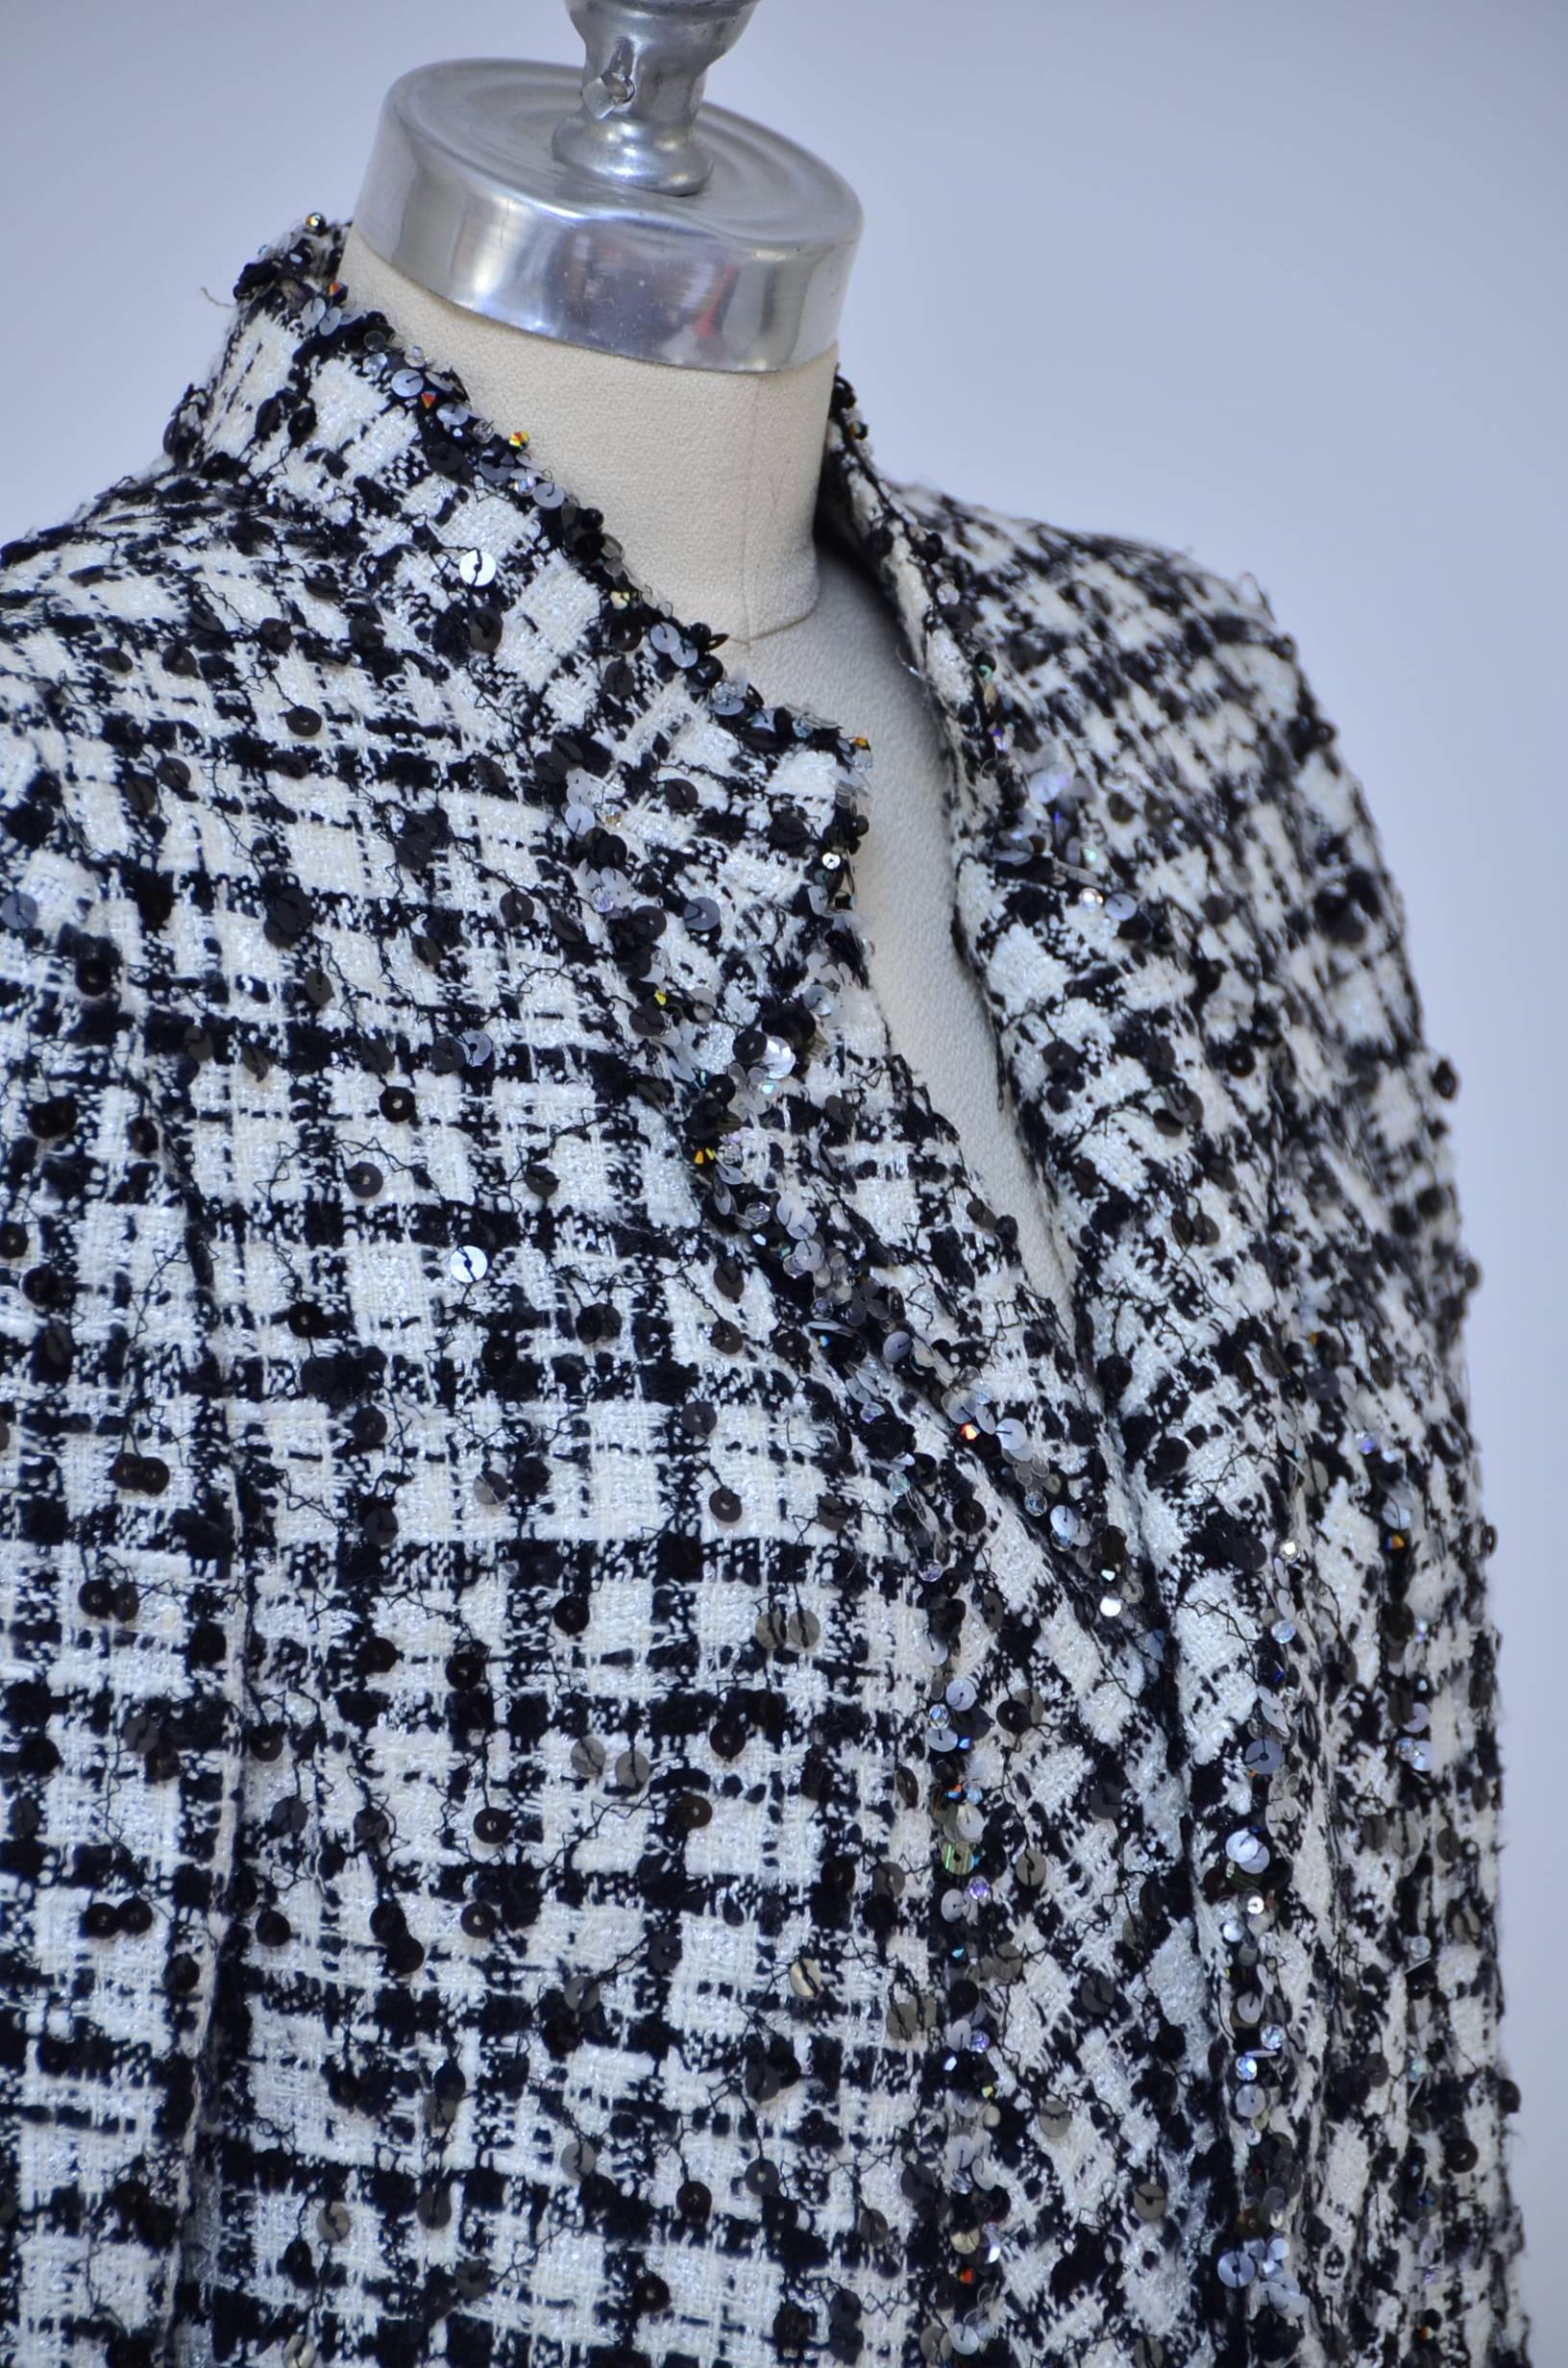 Beautiful Chanel Haute Couture black/white tweed suit.
Embellished with black sequence and beads.
Jacket with matching skirt.Jacket has mini folded collar and no buttons in the front.Open front.
Approximate measure:
Jacket waist 40